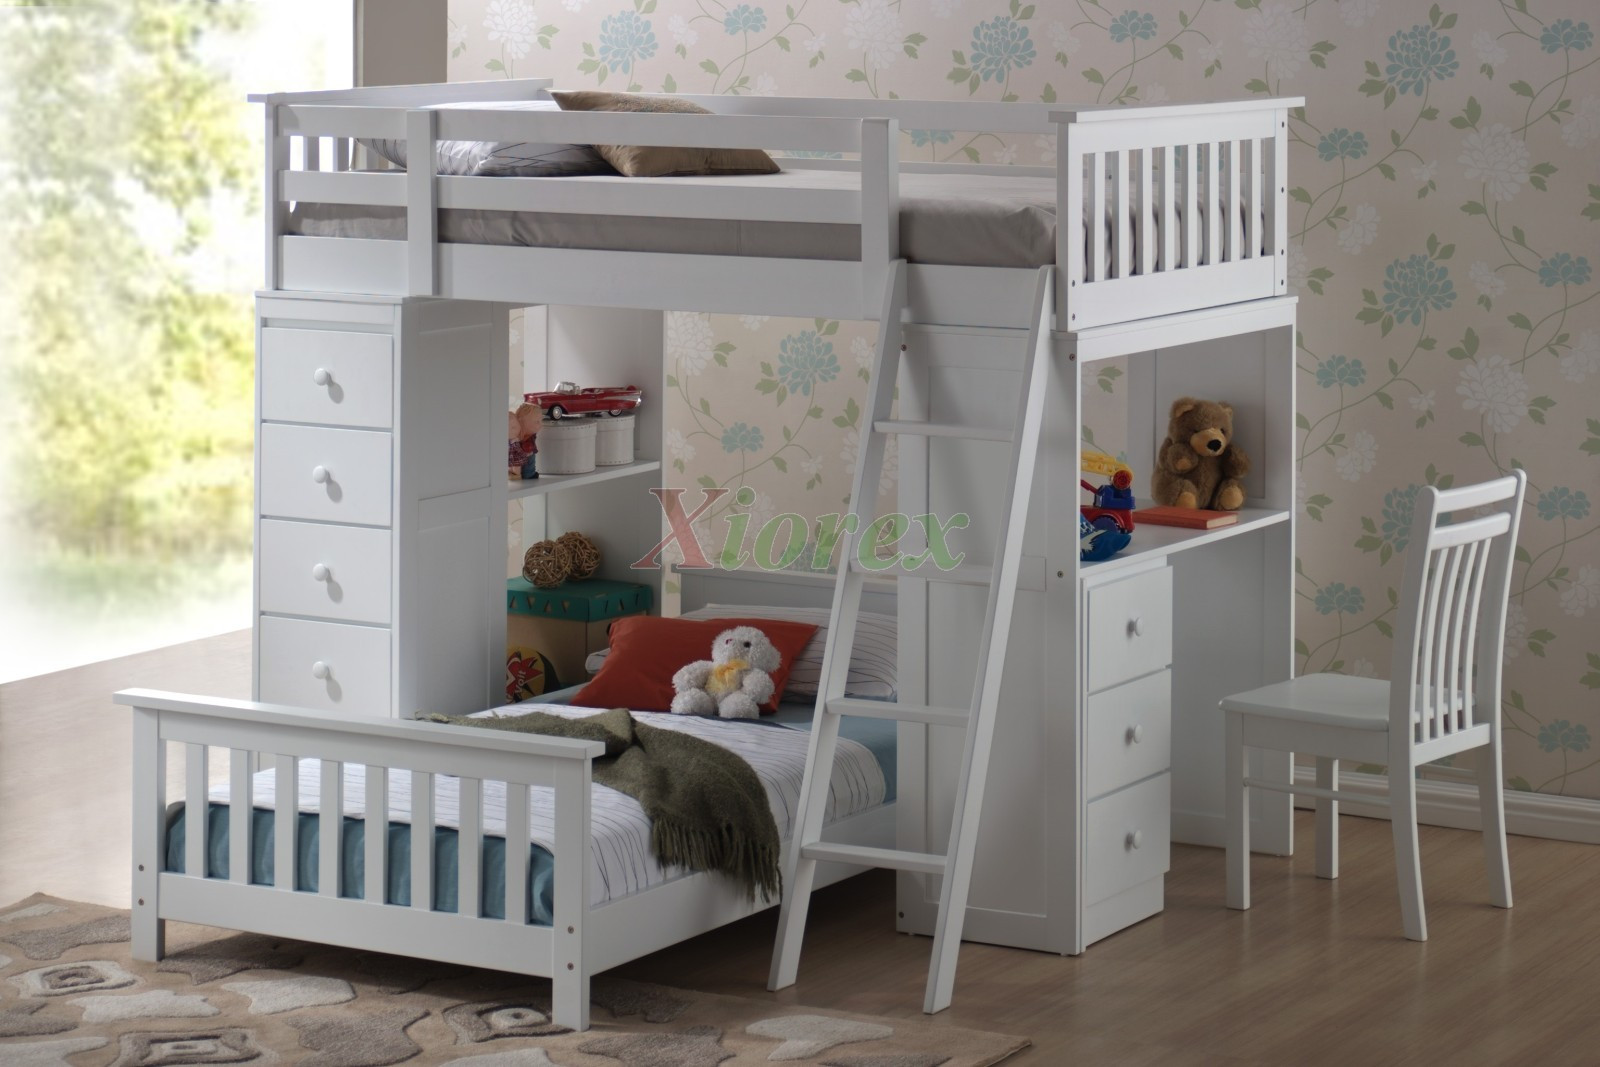 Kids Bunk Beds With Storage
 Bunk Beds With Storage And Desk Home Design line